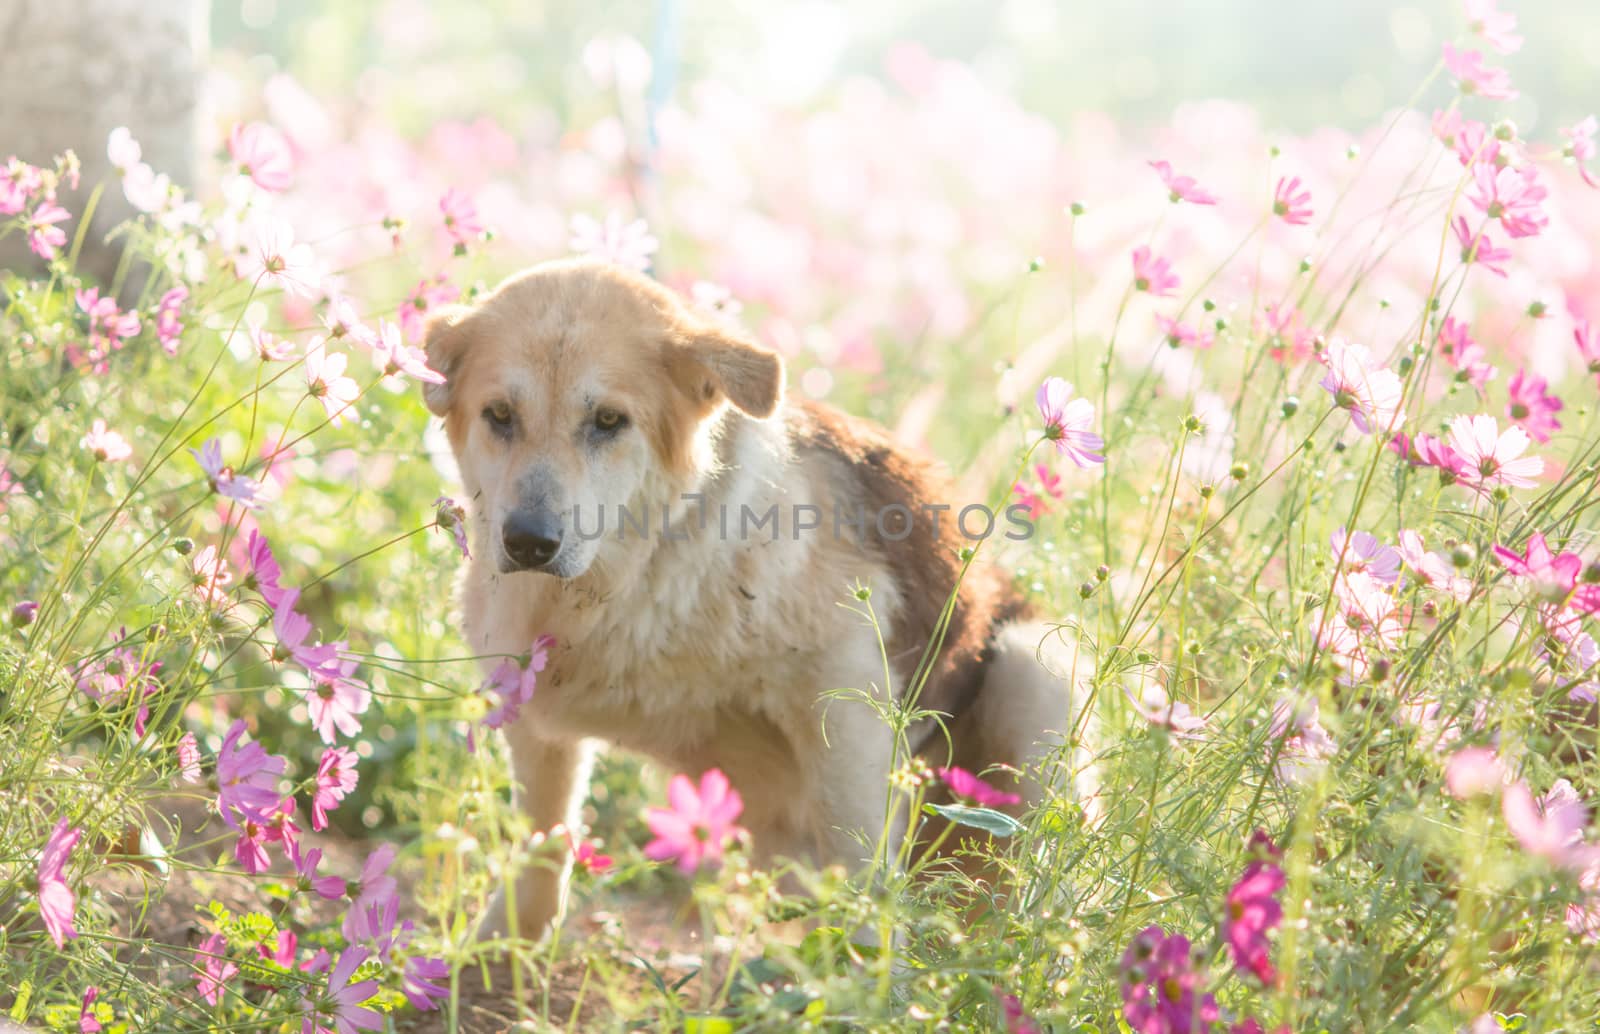 Blurry dog and flower for background 